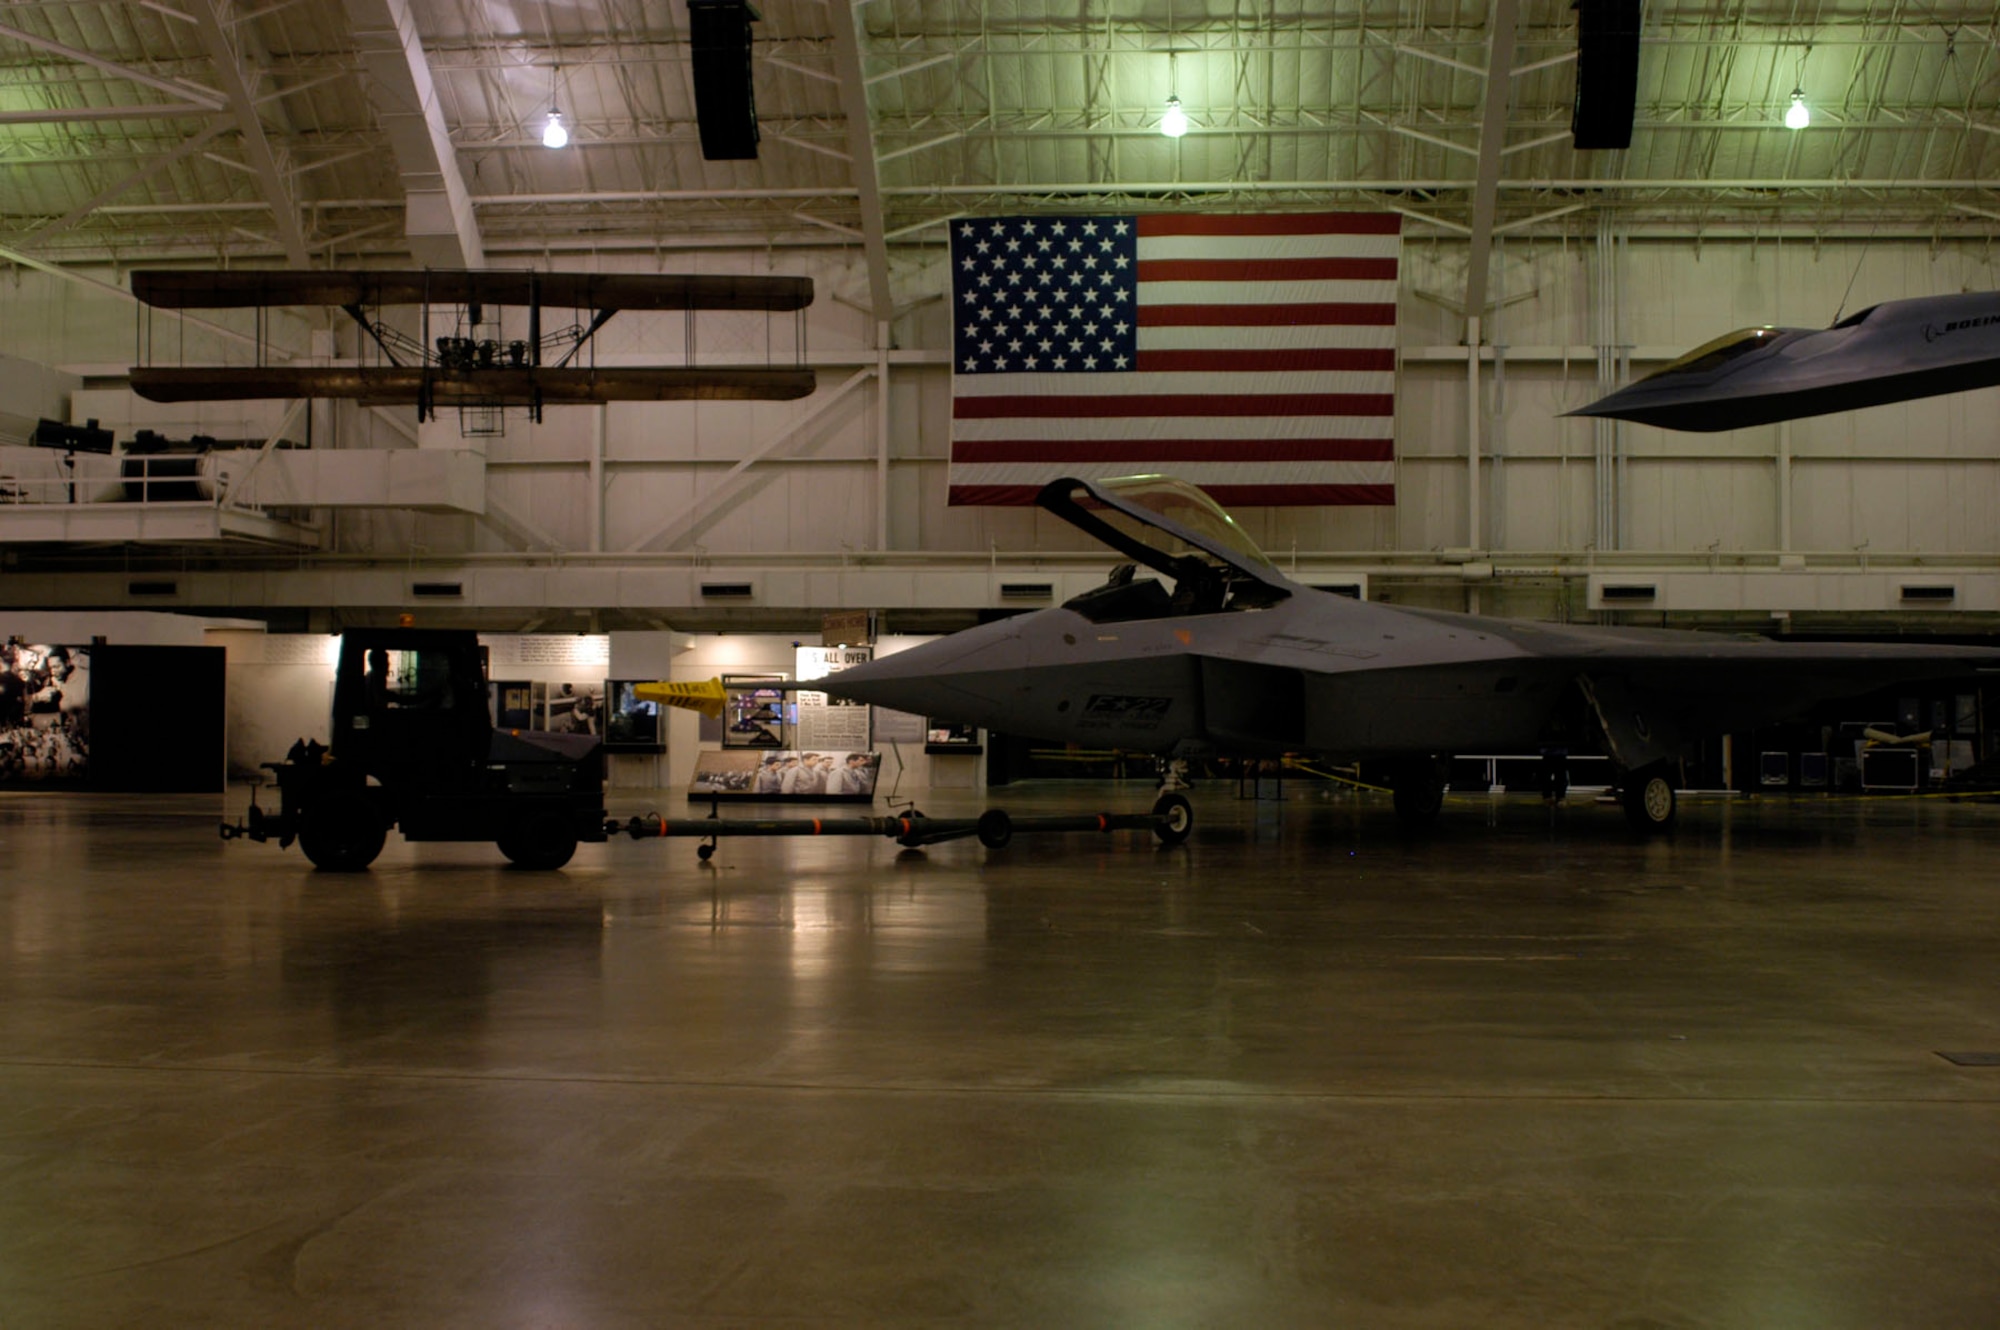 DAYTON, Ohio - The F-22A Raptor shortly after is was moved from the restoration area to the National Museum of the U.S. Air Force. (U.S. Air Force photo) 